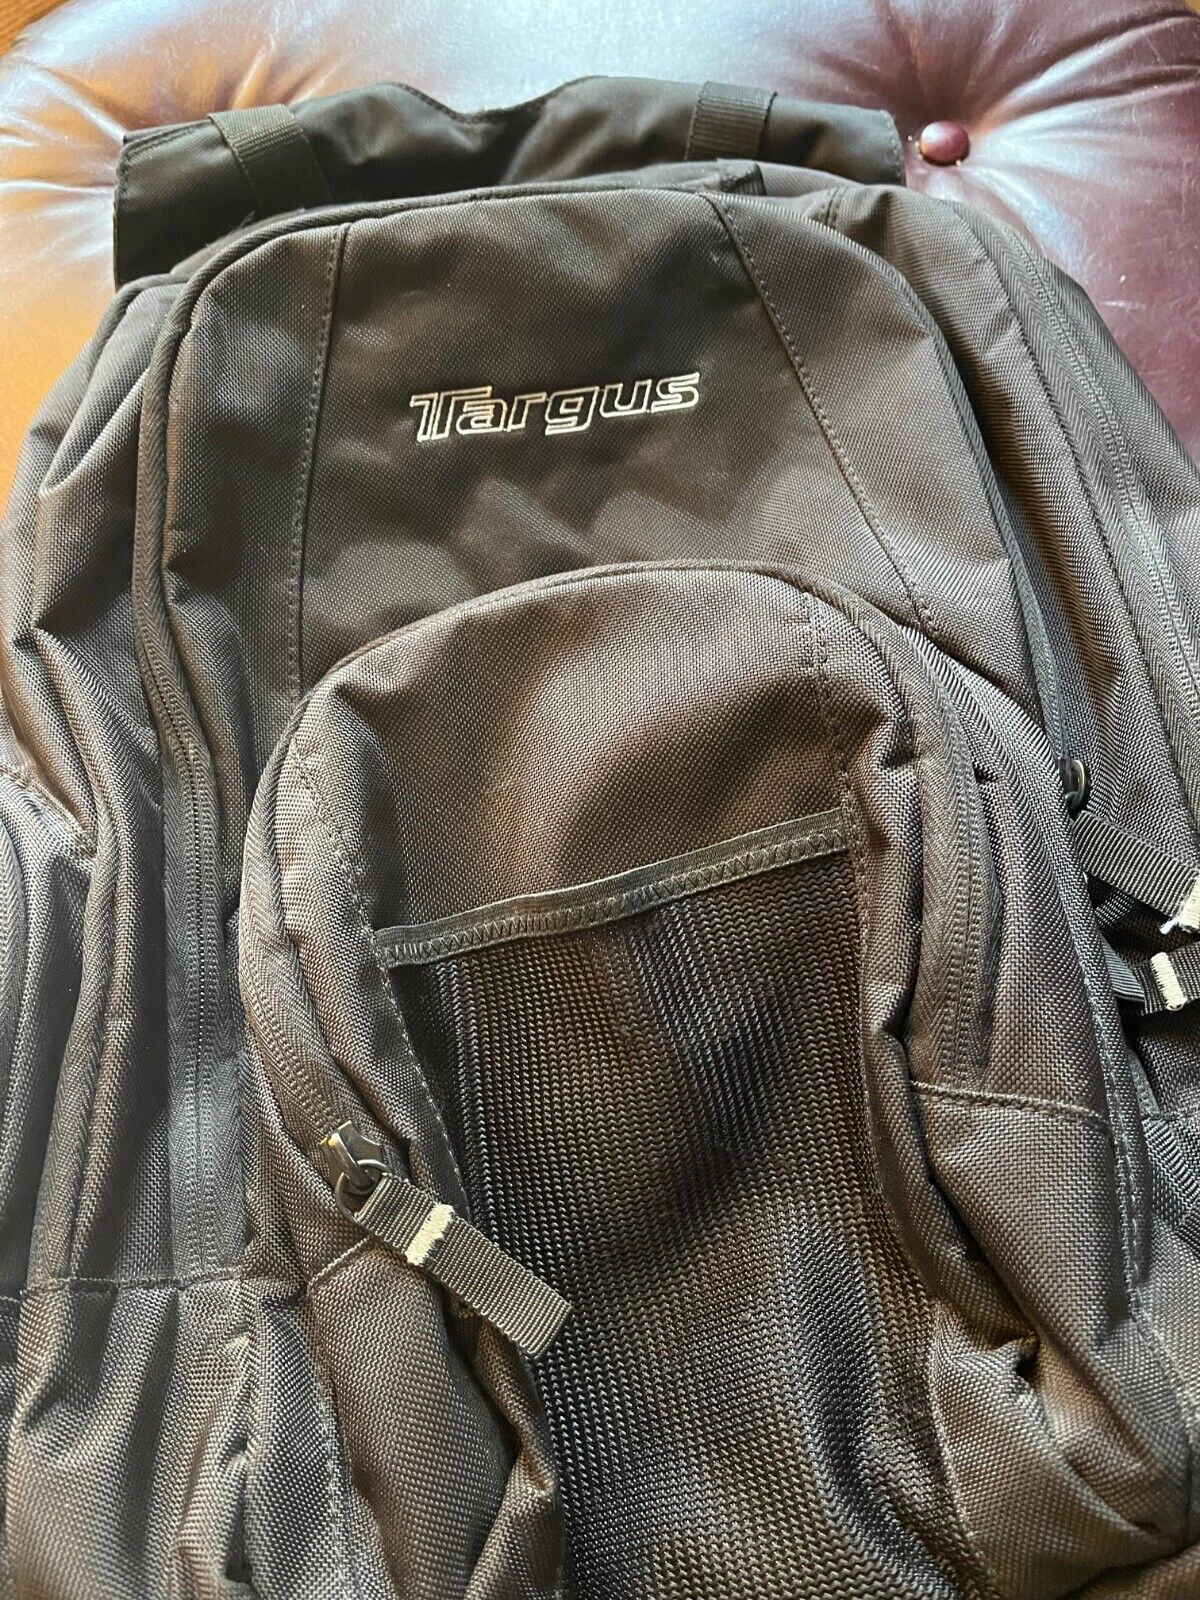 Targus Laptop Backpack Very Good Condition